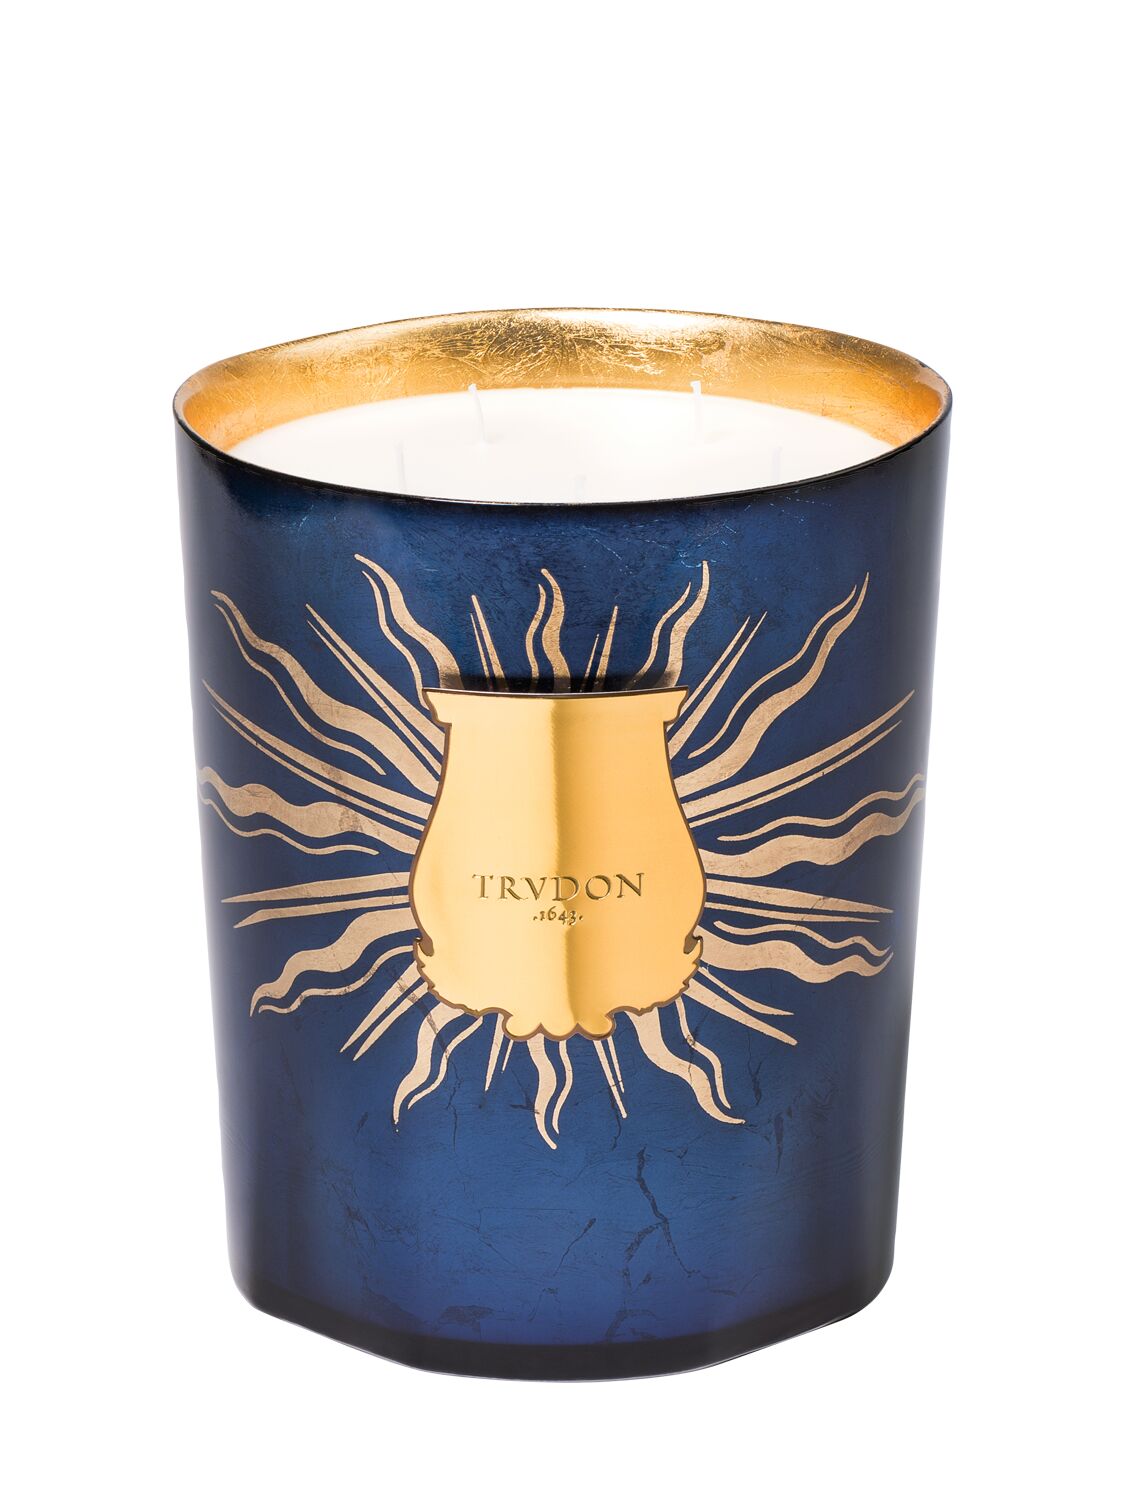 Trudon 2.8kg Fir Candle In Blue